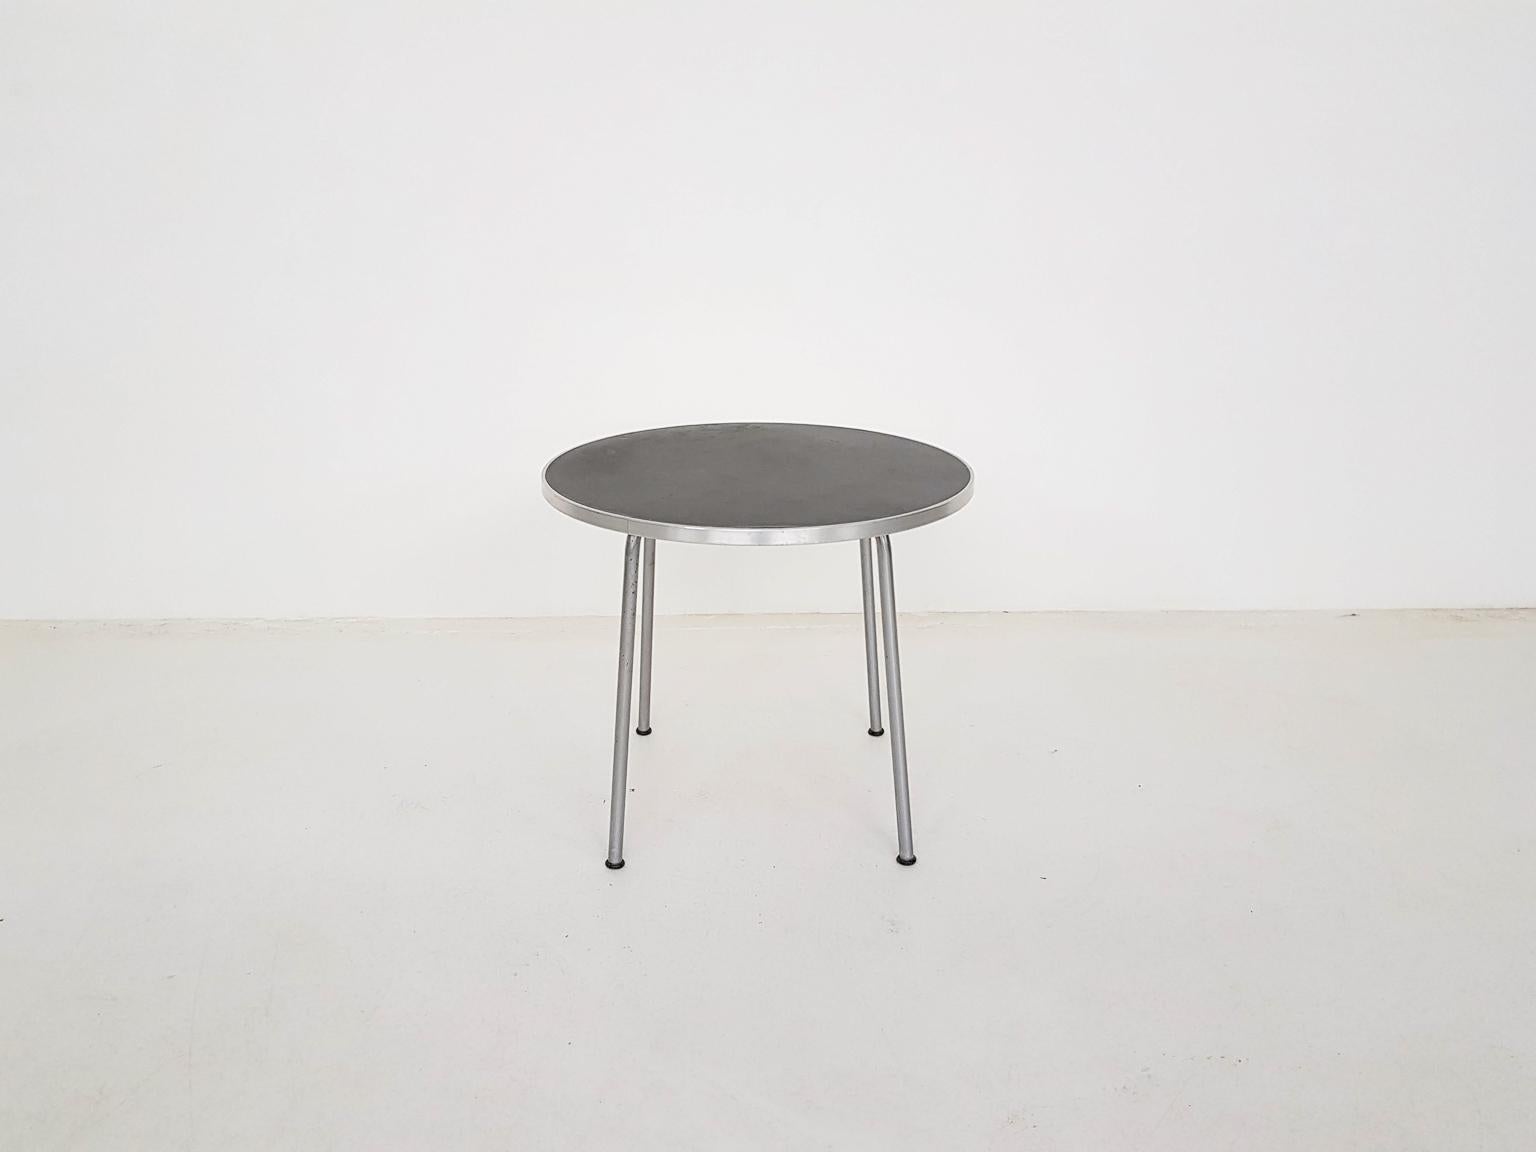 Early Dutch industrial design by Gipsen, the Netherlands. This model 501/3601 side or coffee table was made by Gispen in 1954. The table features a tubular metal frame with a wooden top with a coating called linofelt (a rubber like